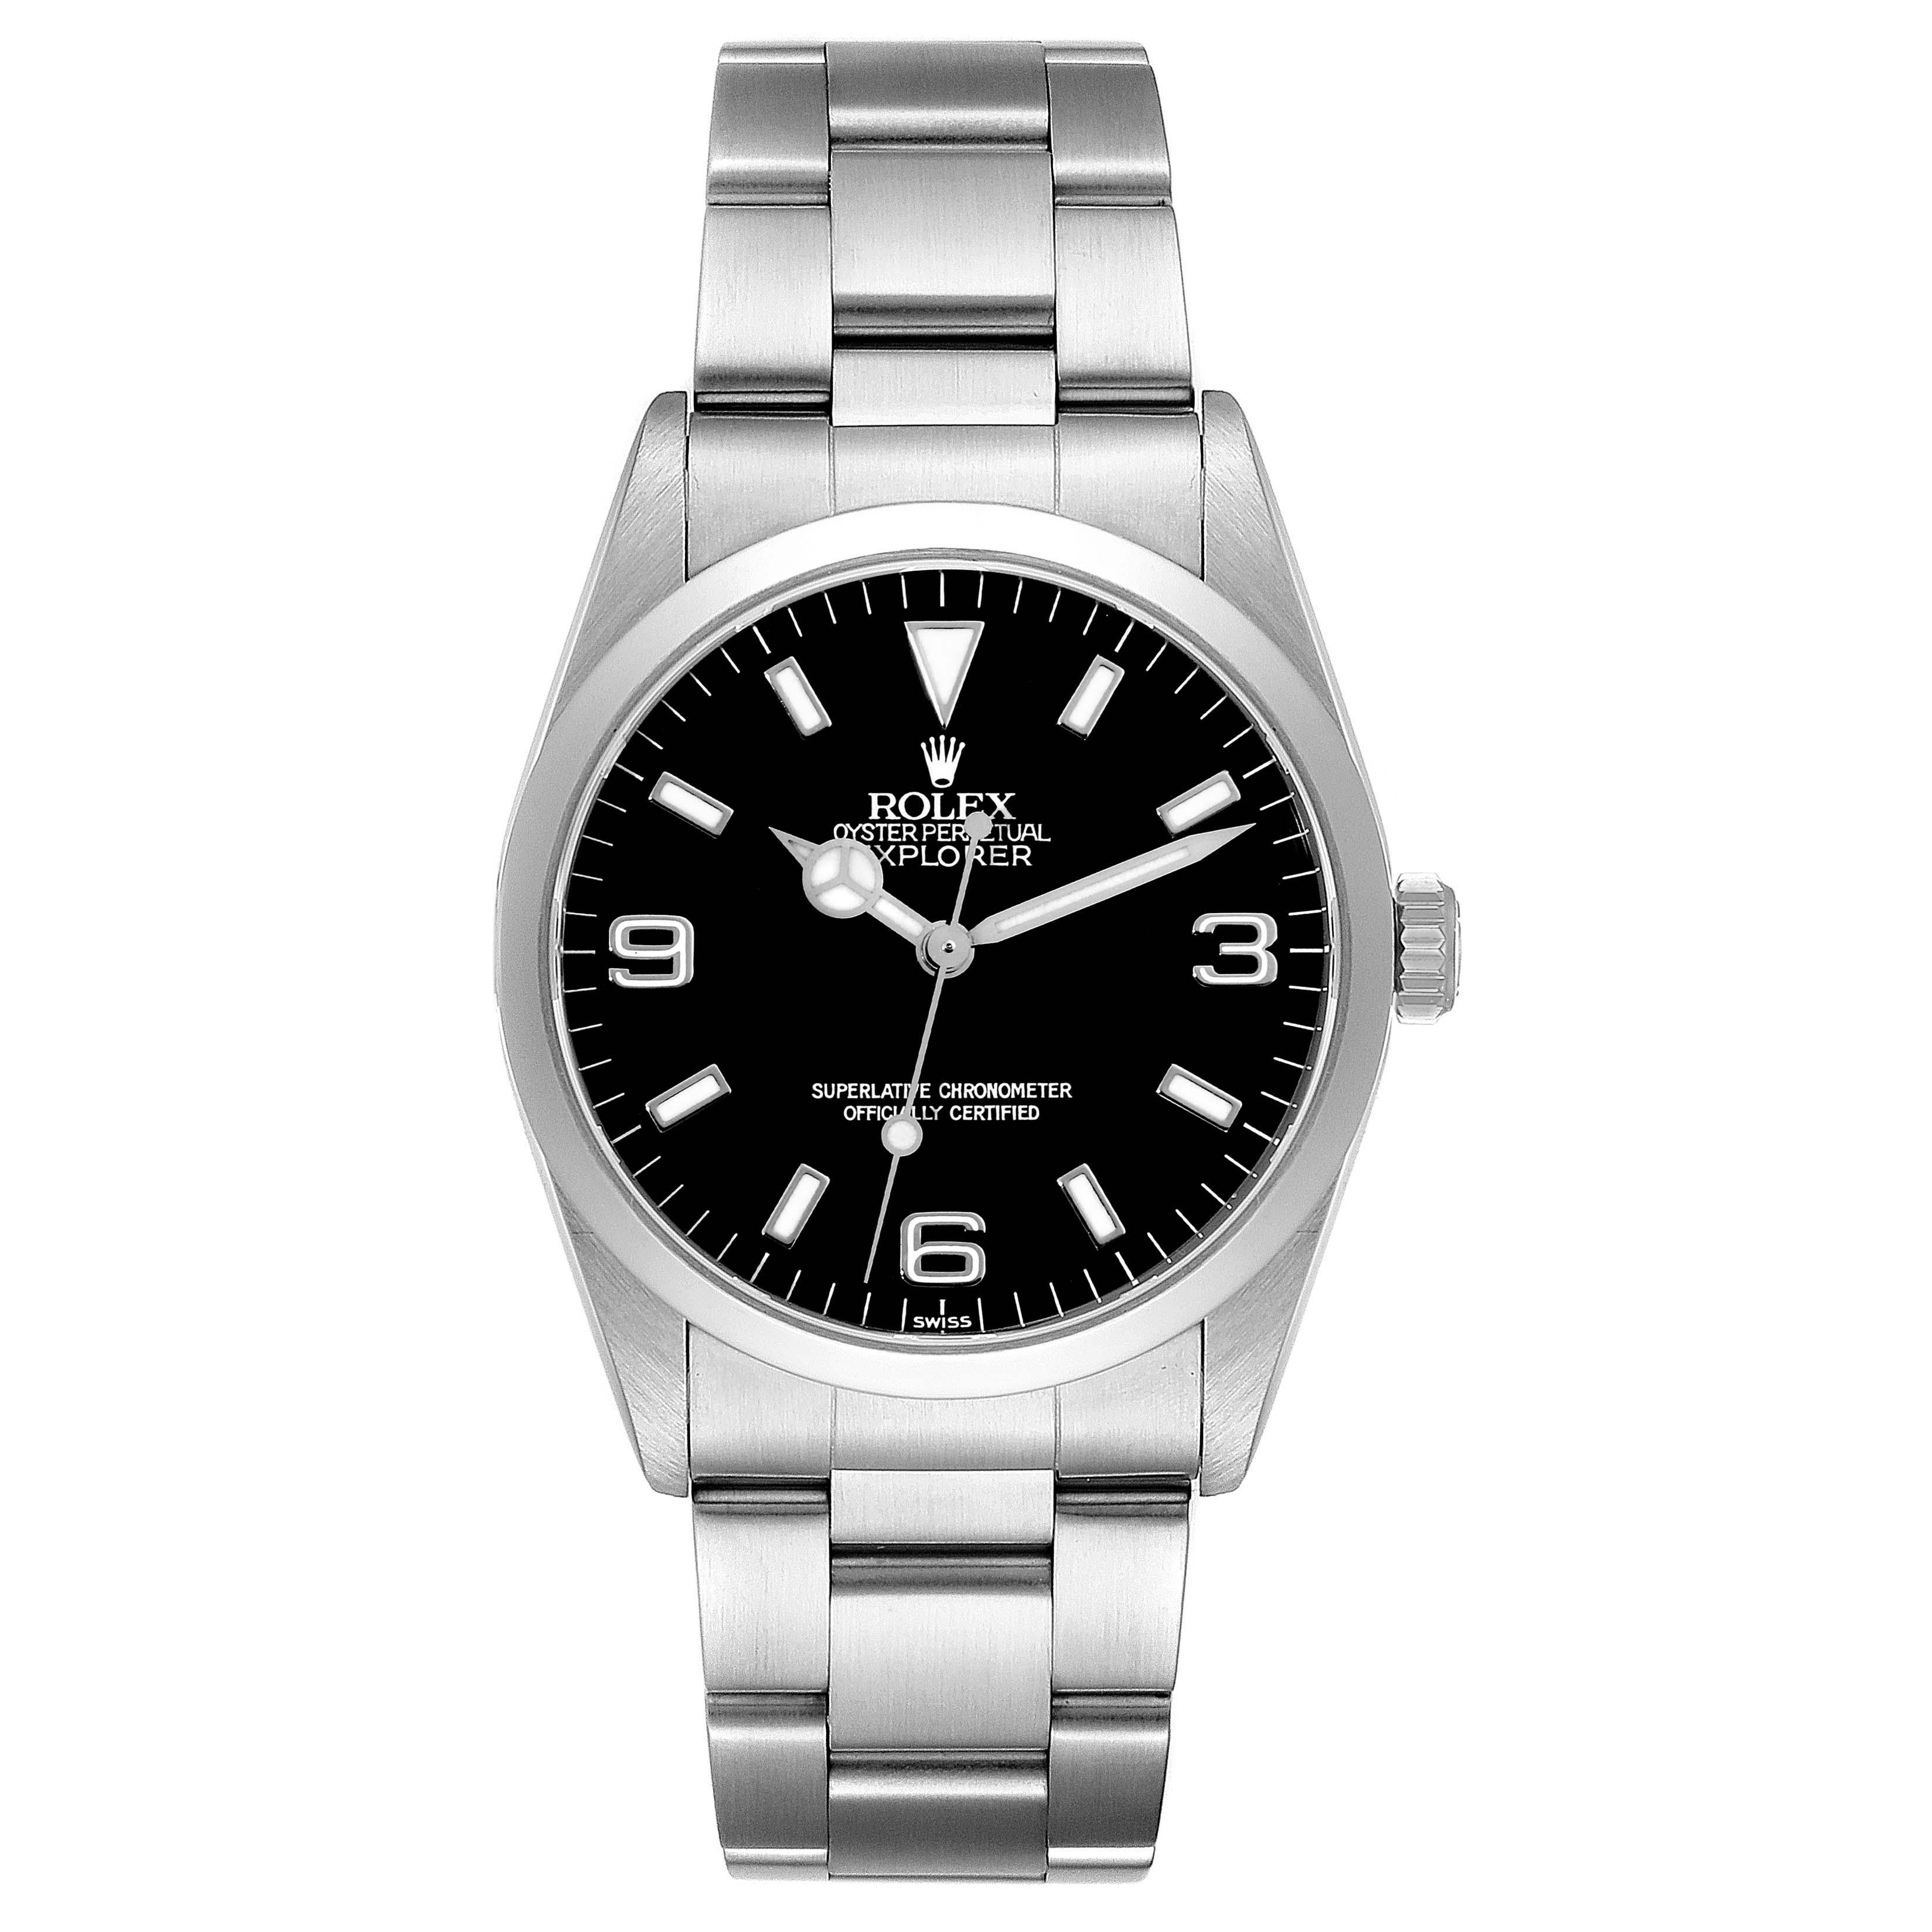 Rolex Explorer I Black Dial Steel Mens Watch 14270 Papers. Officially certified chronometer automatic self-winding movement. Stainless steel case 36.0 mm in diameter. Rolex logo on a crown. Stainless steel smooth domed bezel. Scratch resistant